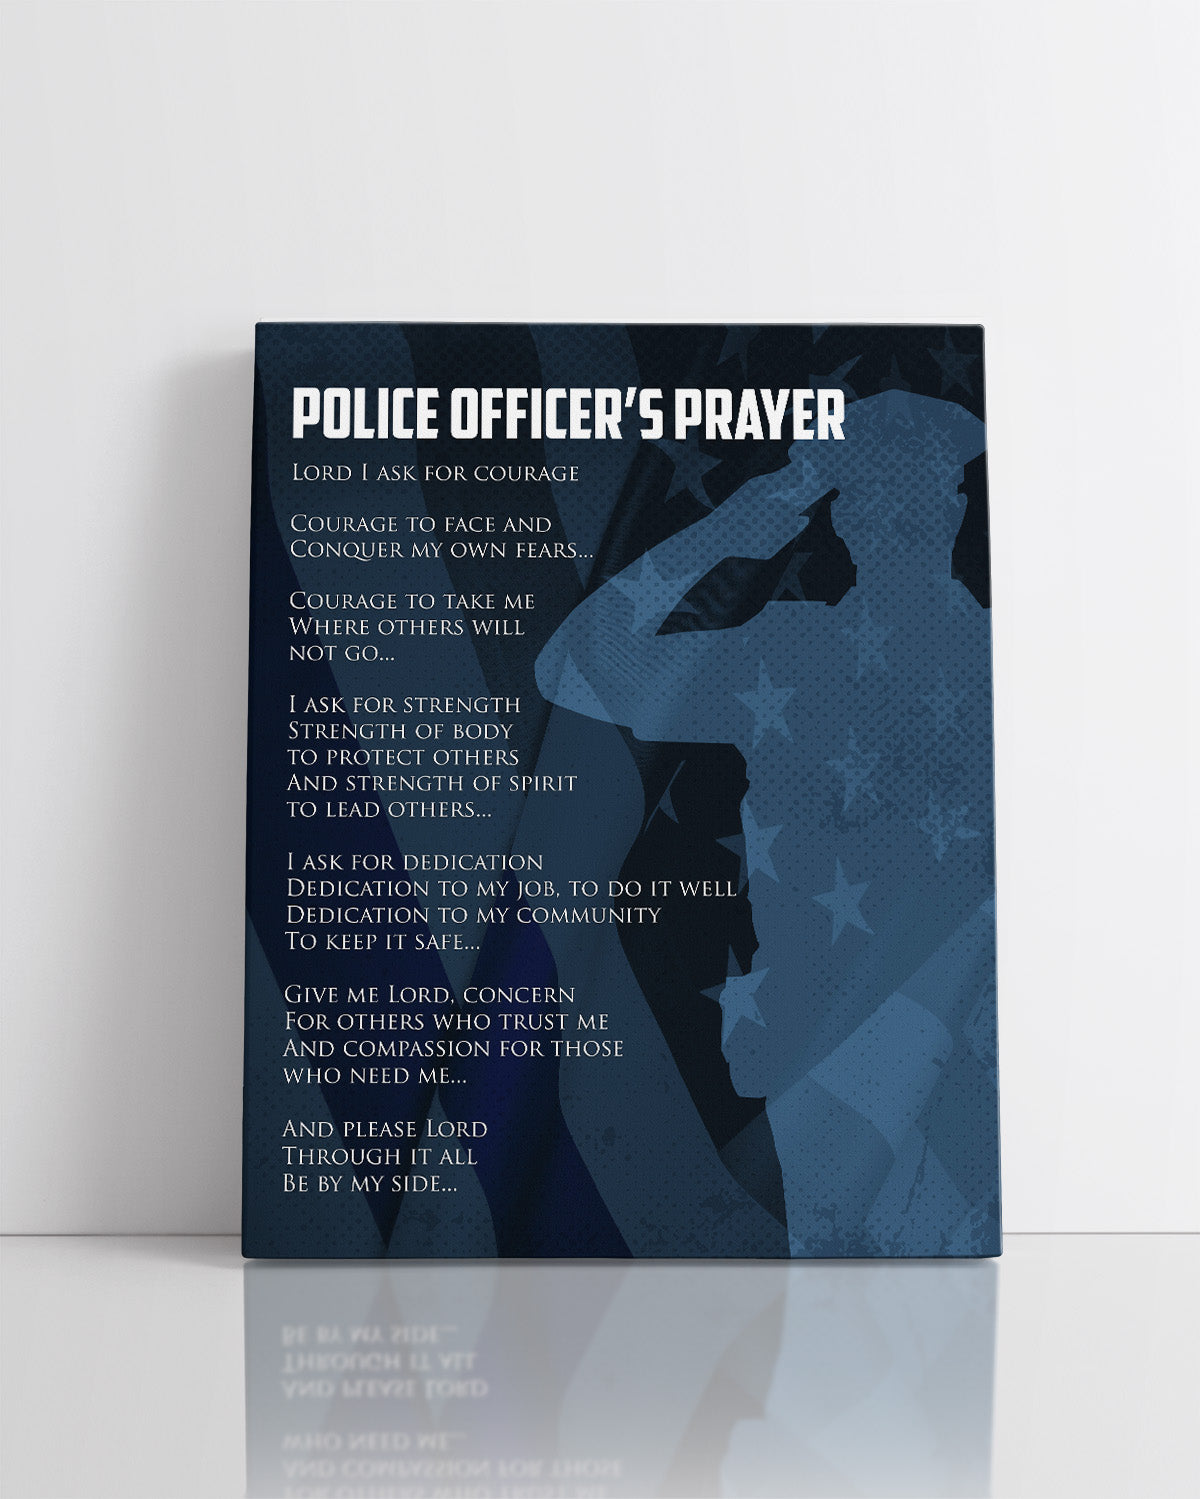 Police Prayer Wall Art - Law Enforcement Prints - Police Officer Gifts - Police Academy Graduation - Police Officer Wall Decor - Law Enforcement Appreciation Gift